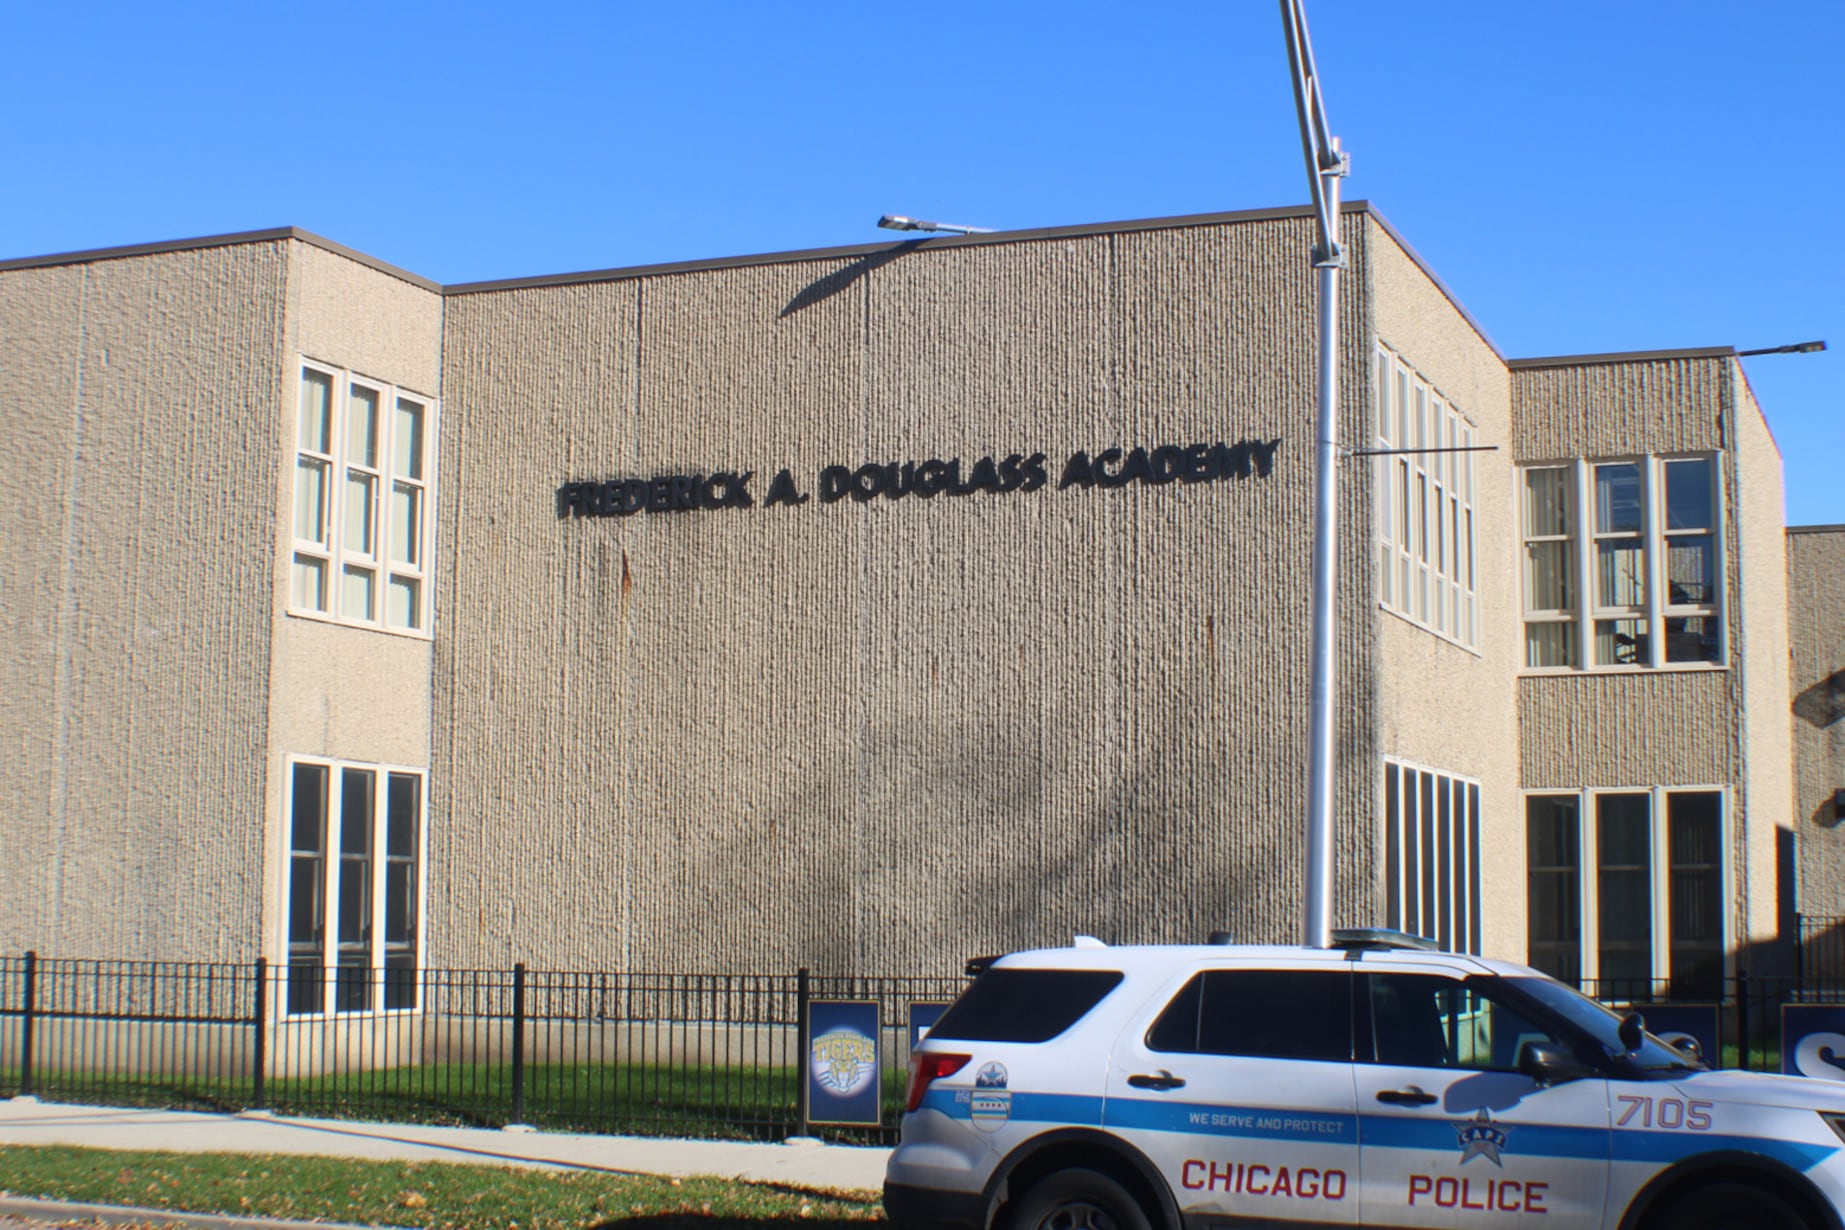 The side of a tan brick school with the name of the school on the side of the building with a Chicago Police car in the foreground.